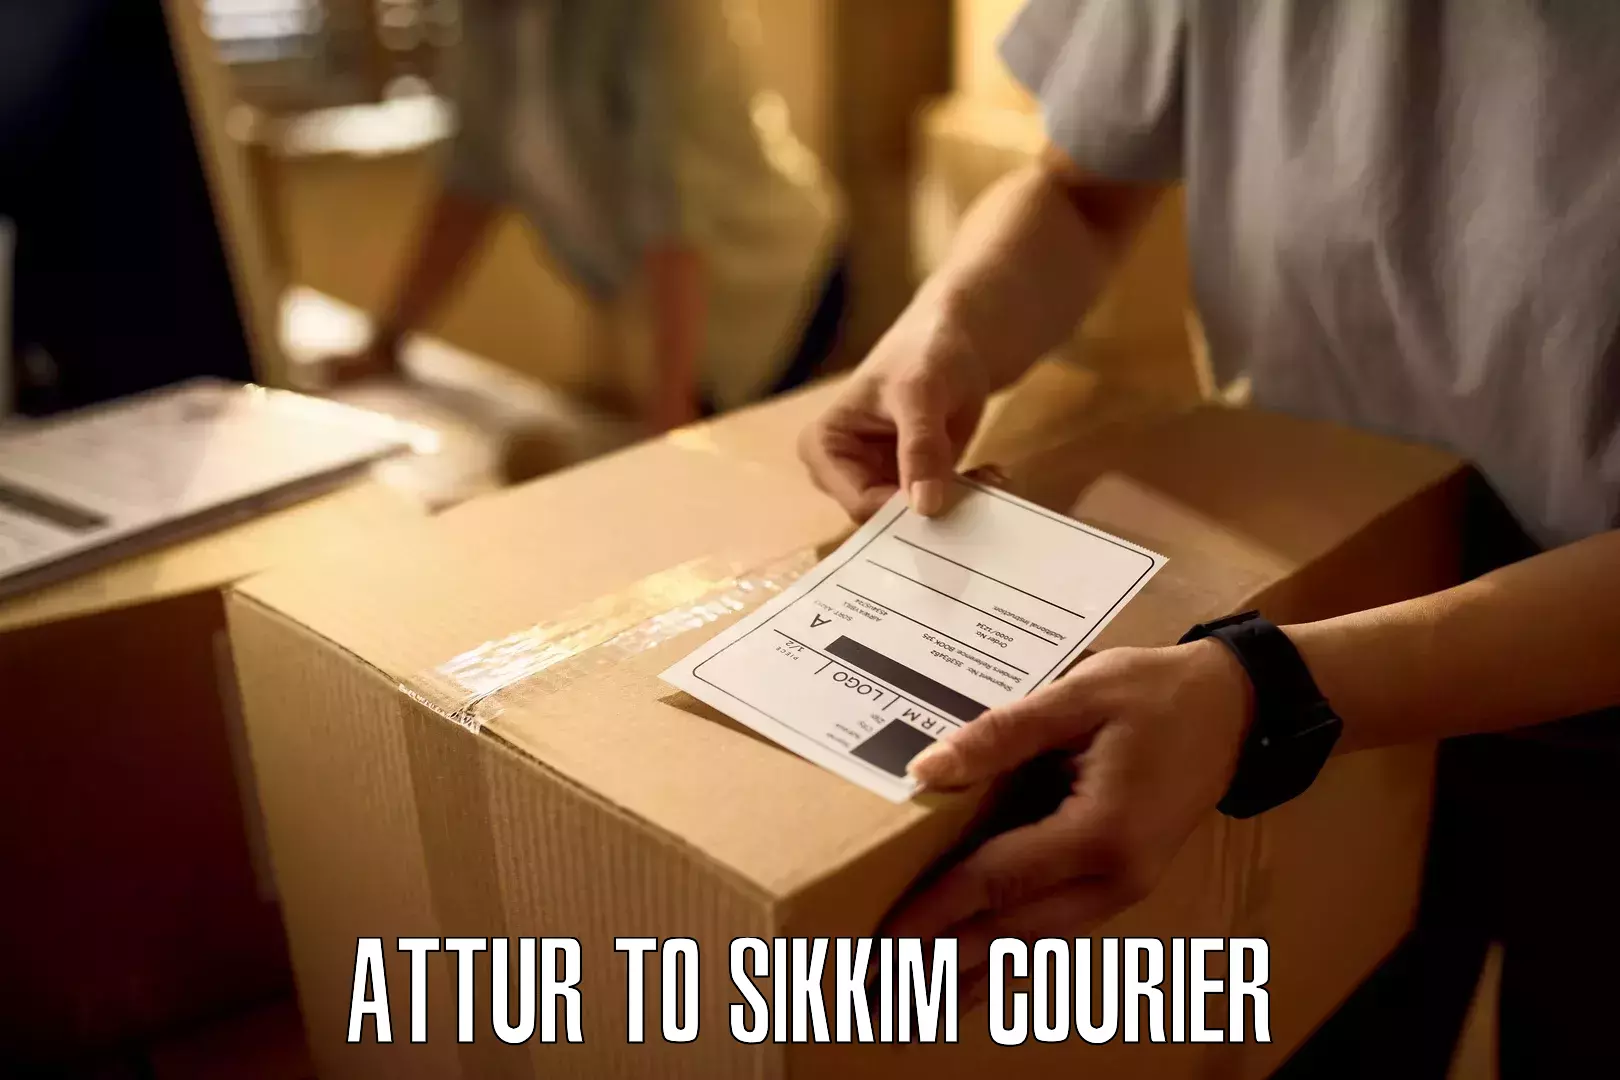 Next-day delivery options Attur to South Sikkim